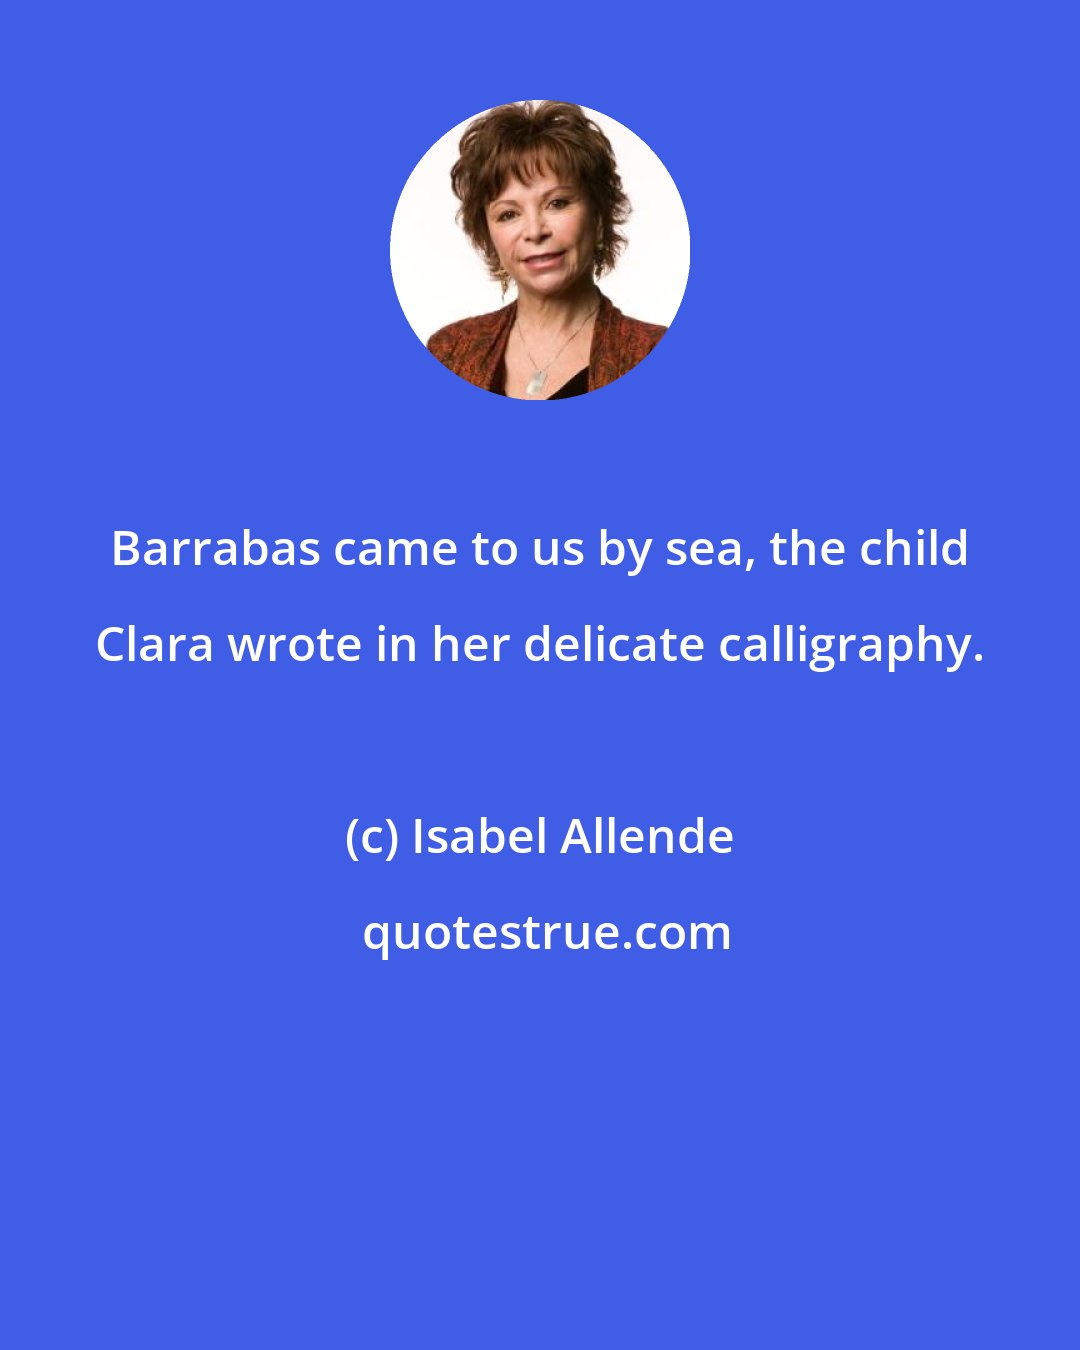 Isabel Allende: Barrabas came to us by sea, the child Clara wrote in her delicate calligraphy.